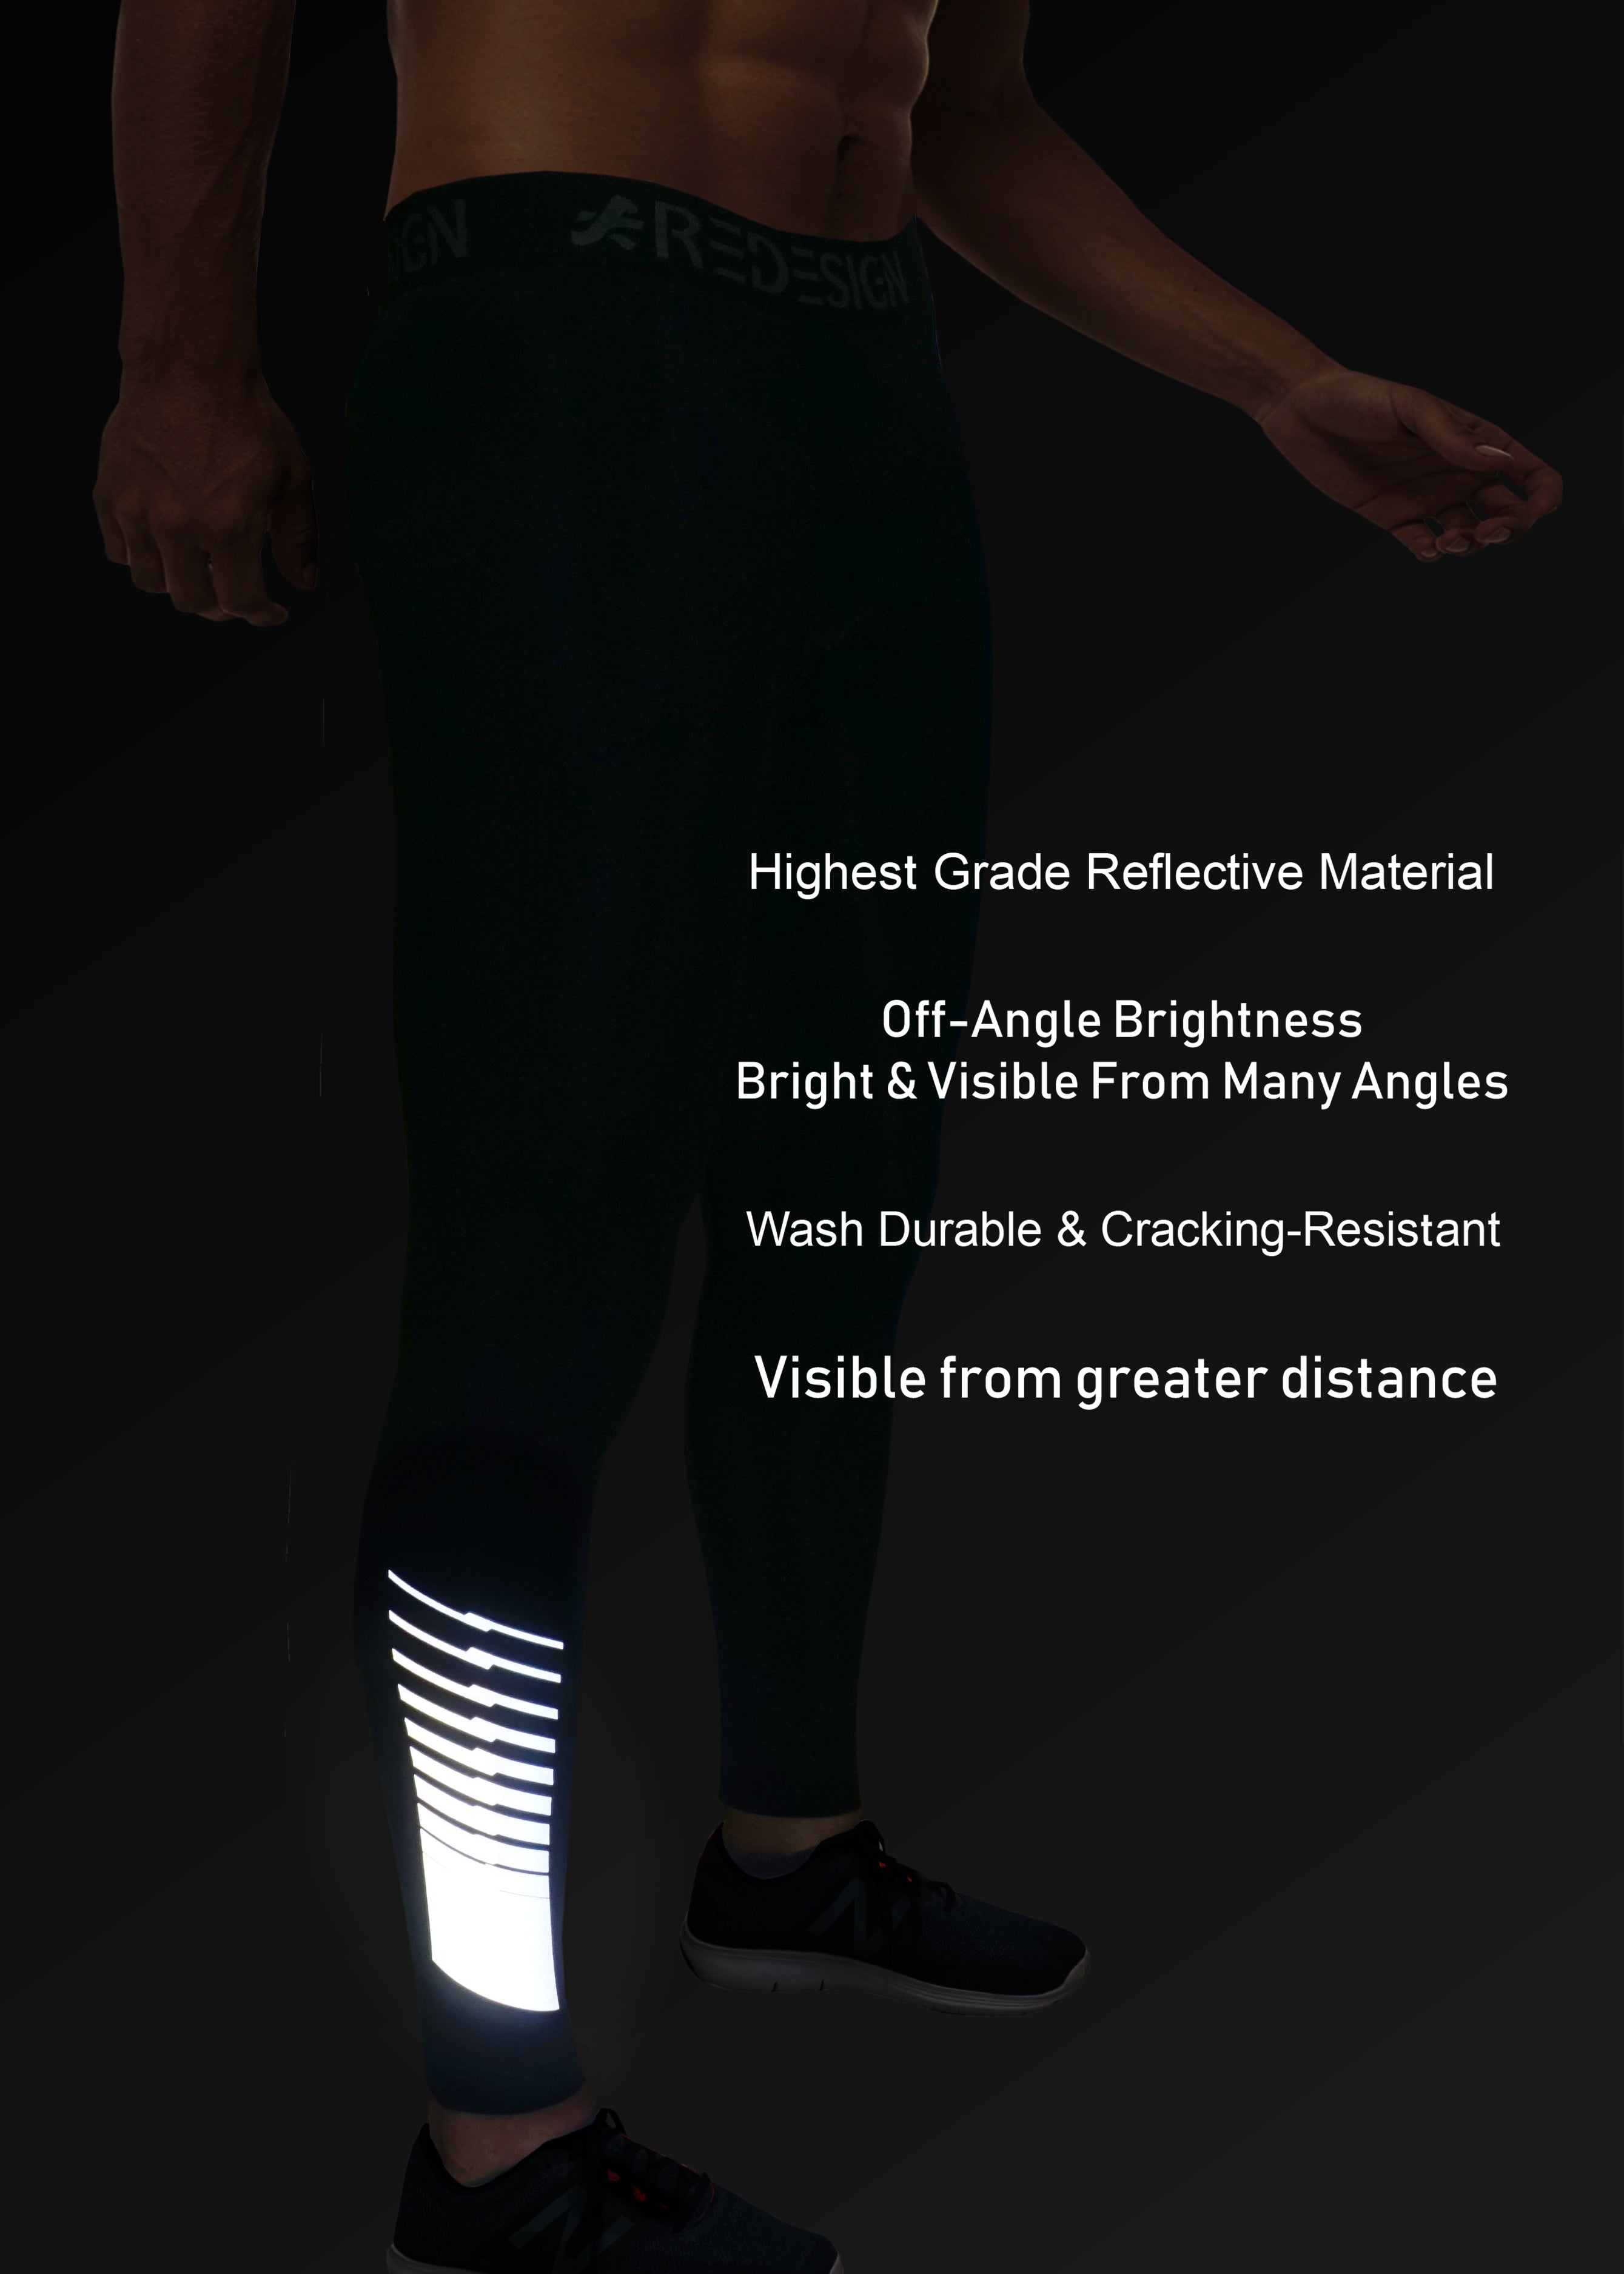 ReDesign Silver Reflective Compression Pant (Black)